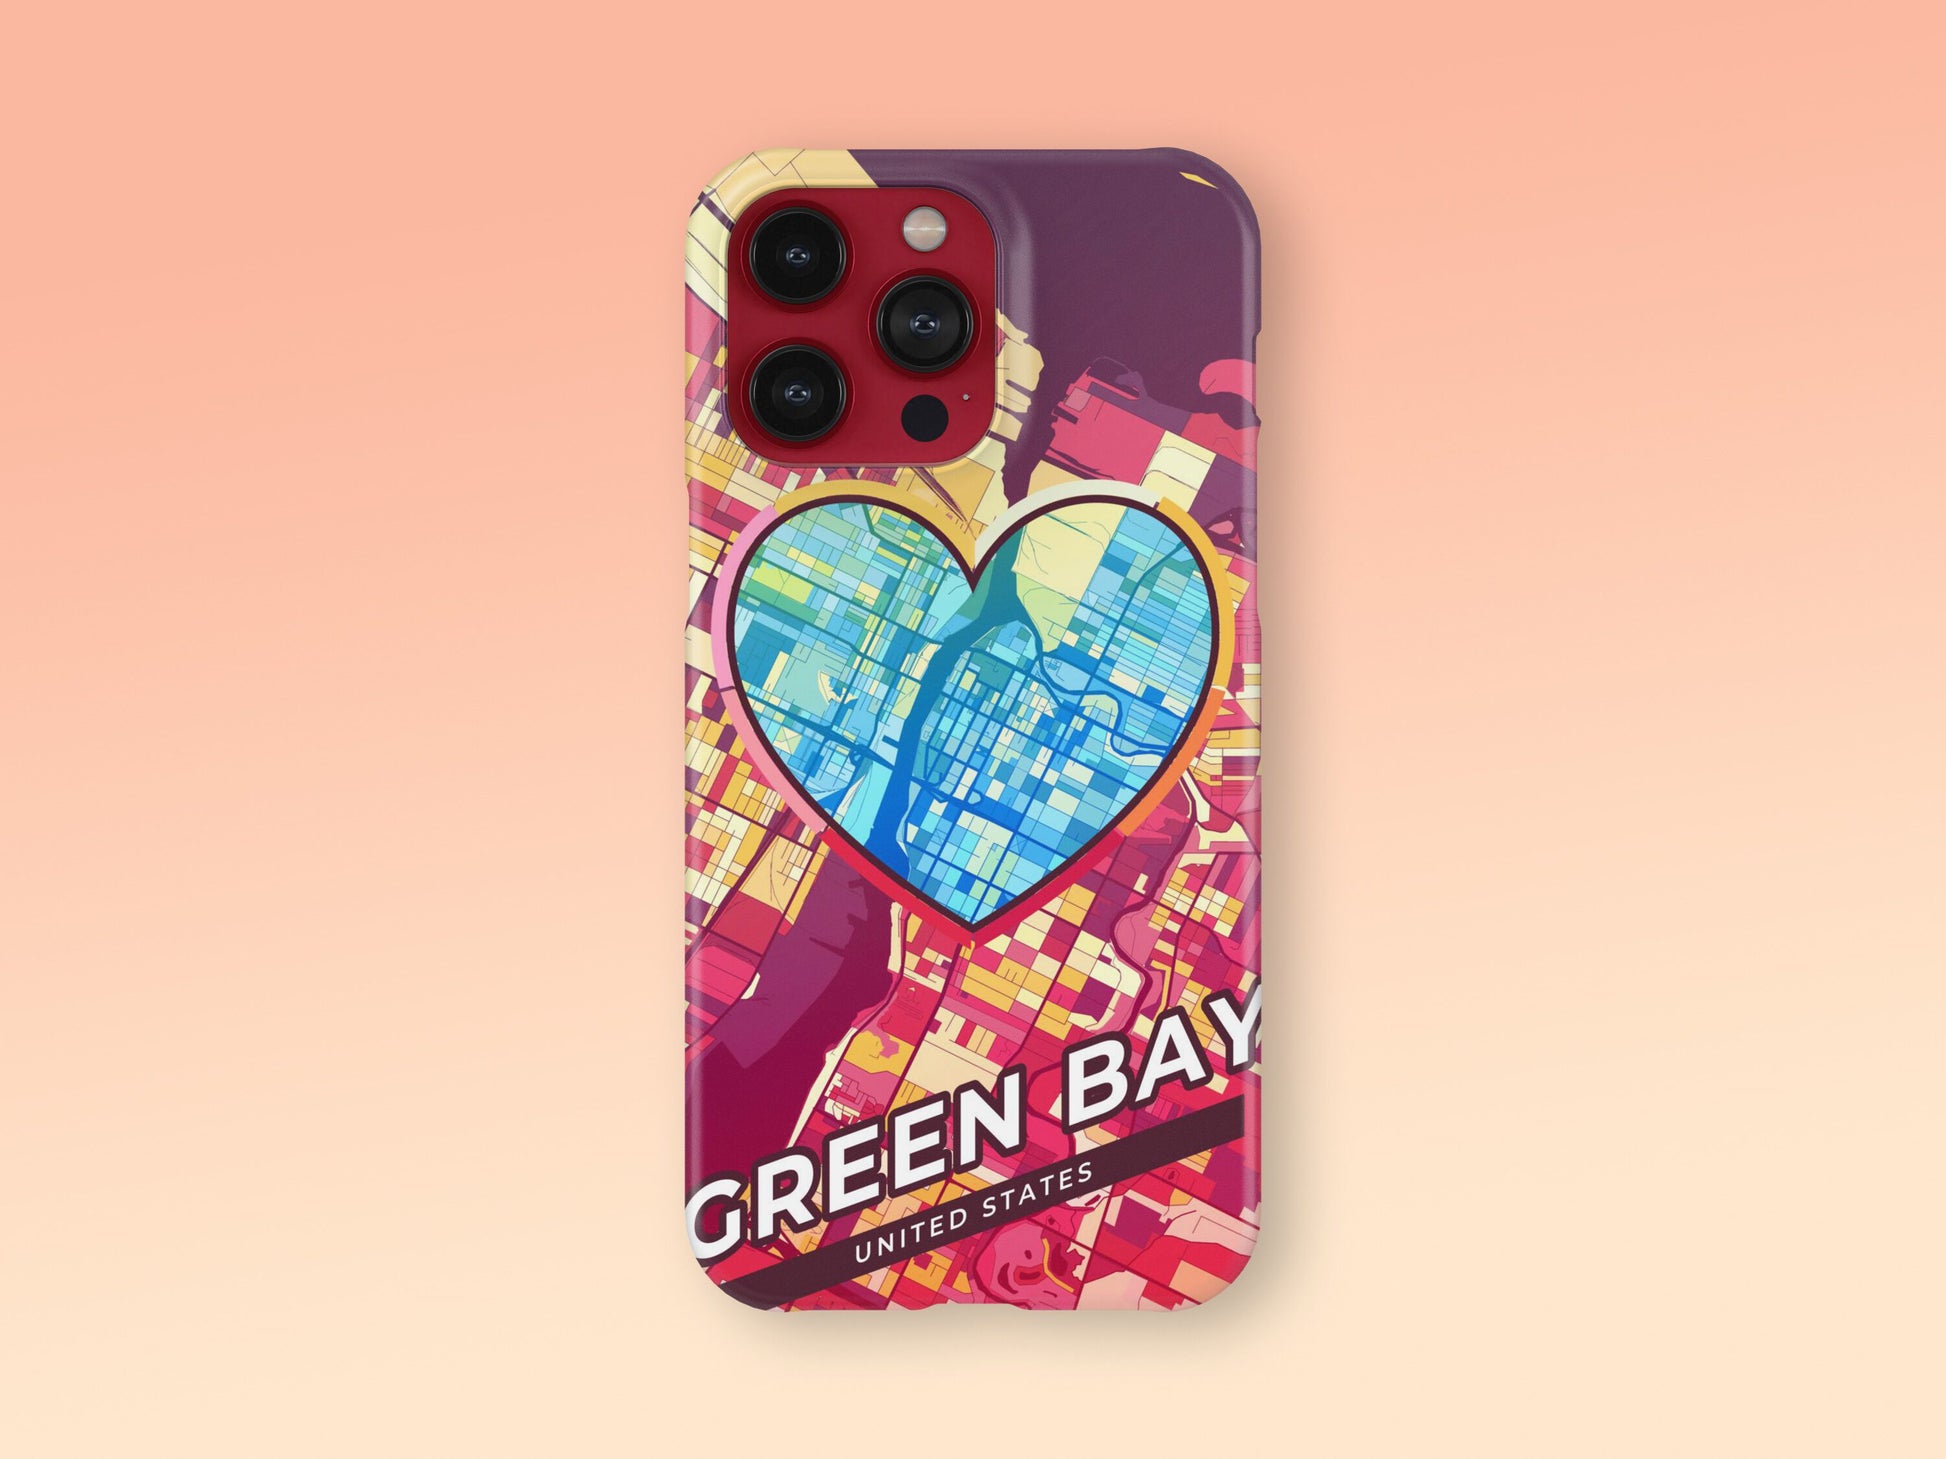 Green Bay Wisconsin slim phone case with colorful icon. Birthday, wedding or housewarming gift. Couple match cases. 2